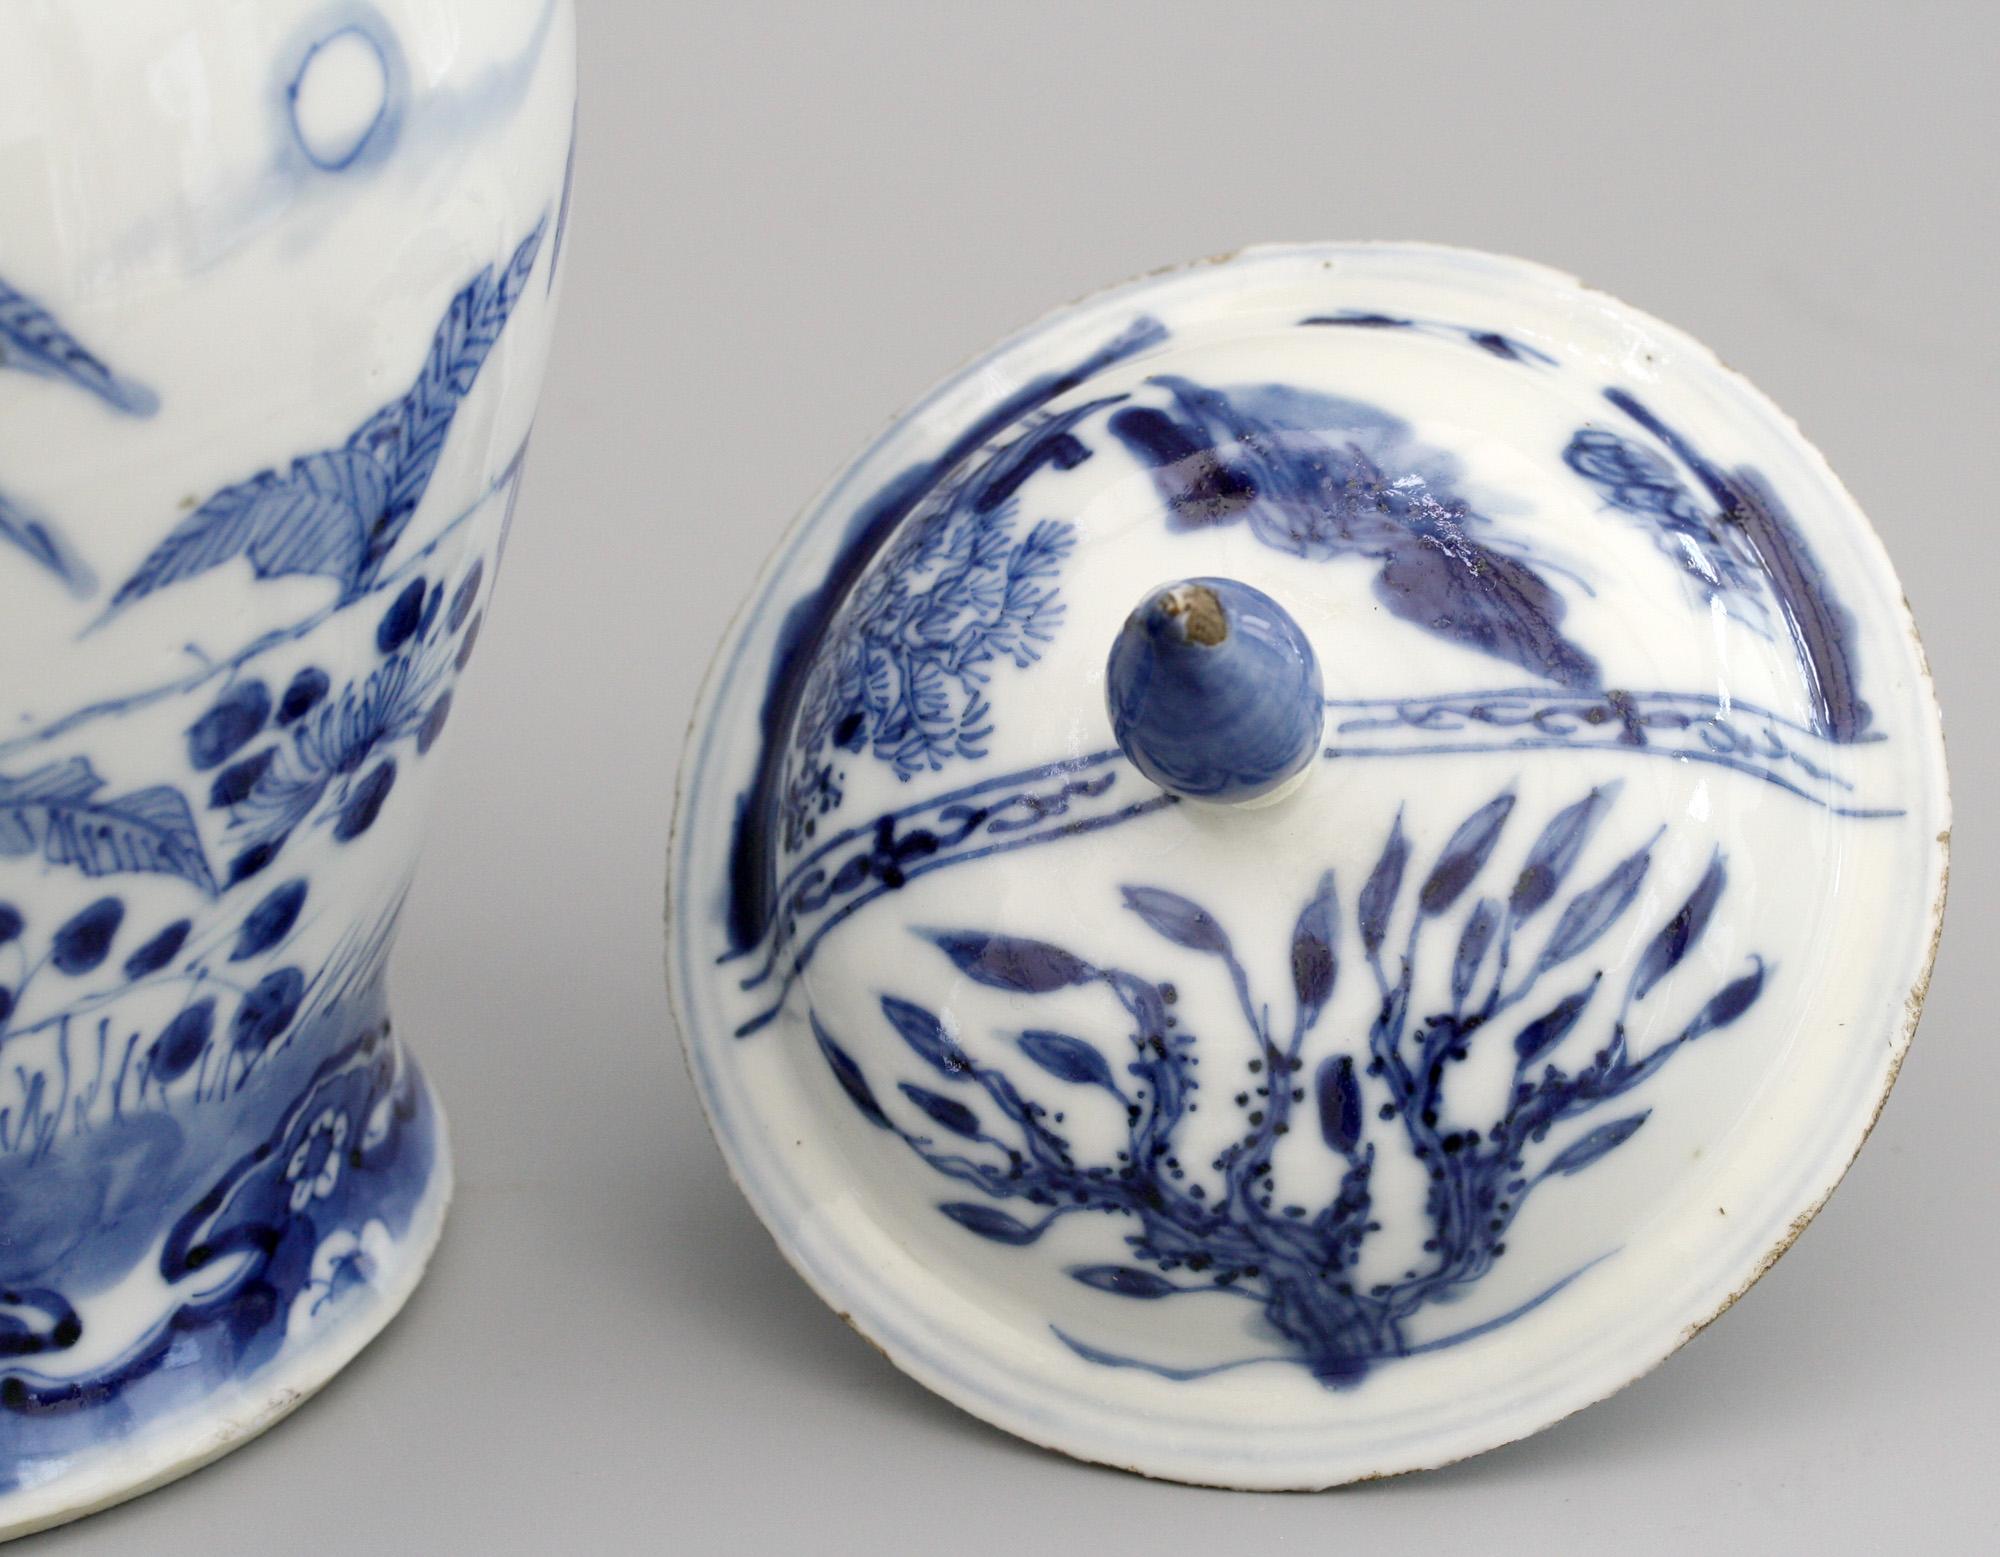 A very fine antique Chinese Kangxi mark porcelain lidded jar finely hand painted in blue and white with insects and butterflies within a rocky landscape, probably dating from the early to mid-19th century. The rounded bulbous shaped jar is painted